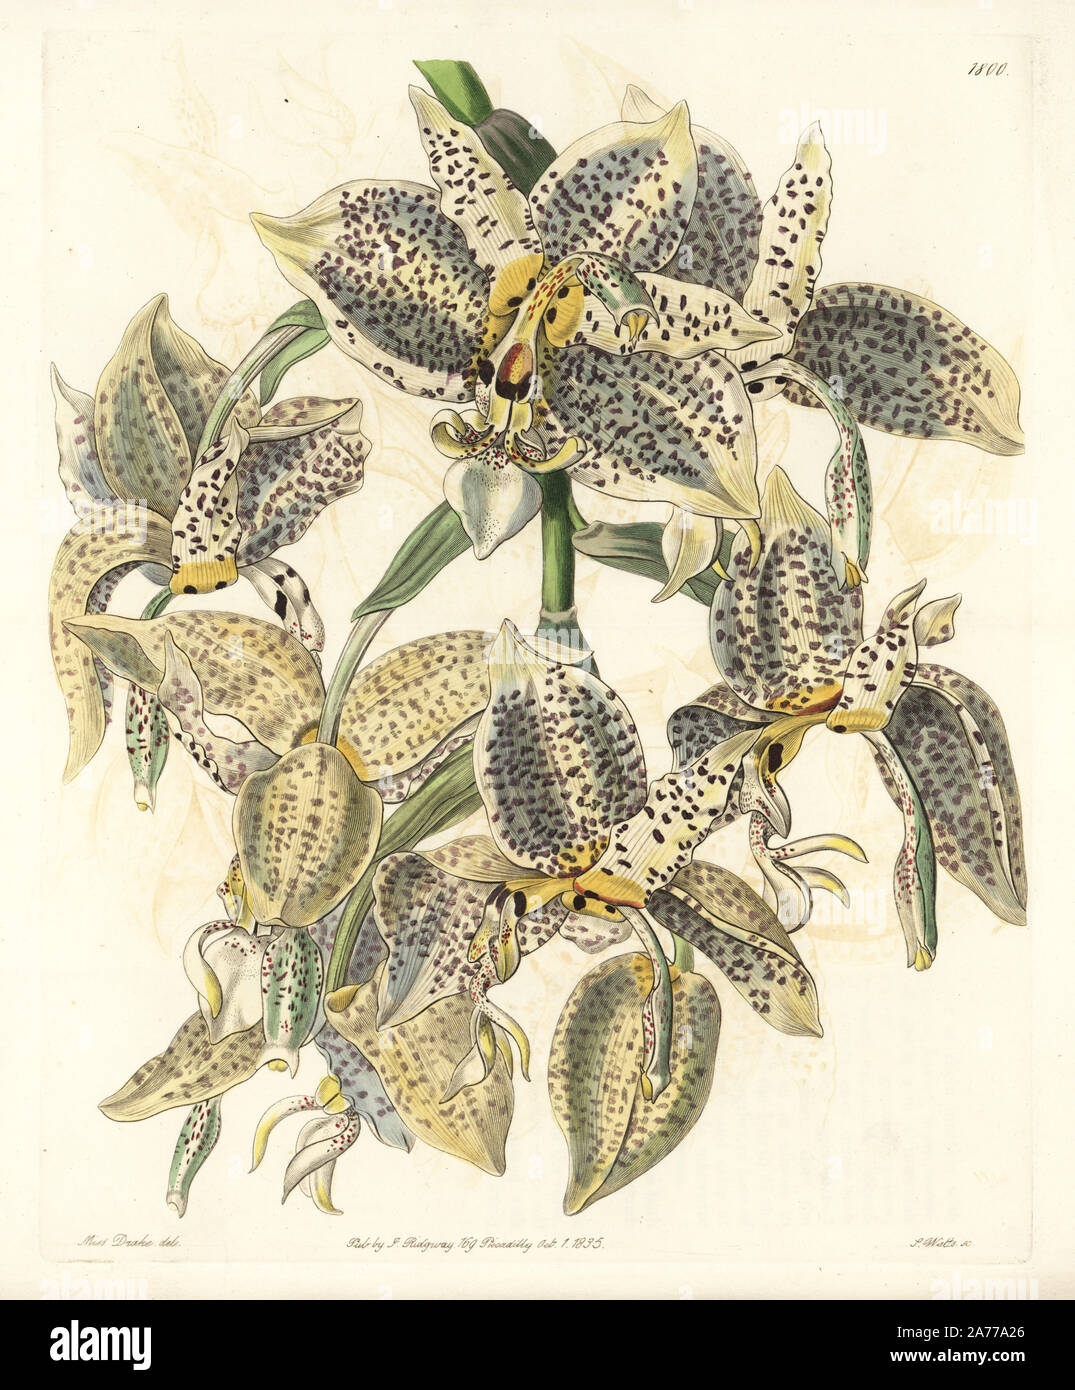 Eyed stanhopea orchid, Stanhopea oculata. Handcoloured copperplate engraving by S. Watts after an illustration by Miss Drake from Sydenham Edwards' 'The Botanical Register,' London, Ridgway, 1835. Sarah Anne Drake (1803-1857) drew over 1,300 plates for the botanist John Lindley, including many orchids. Stock Photo